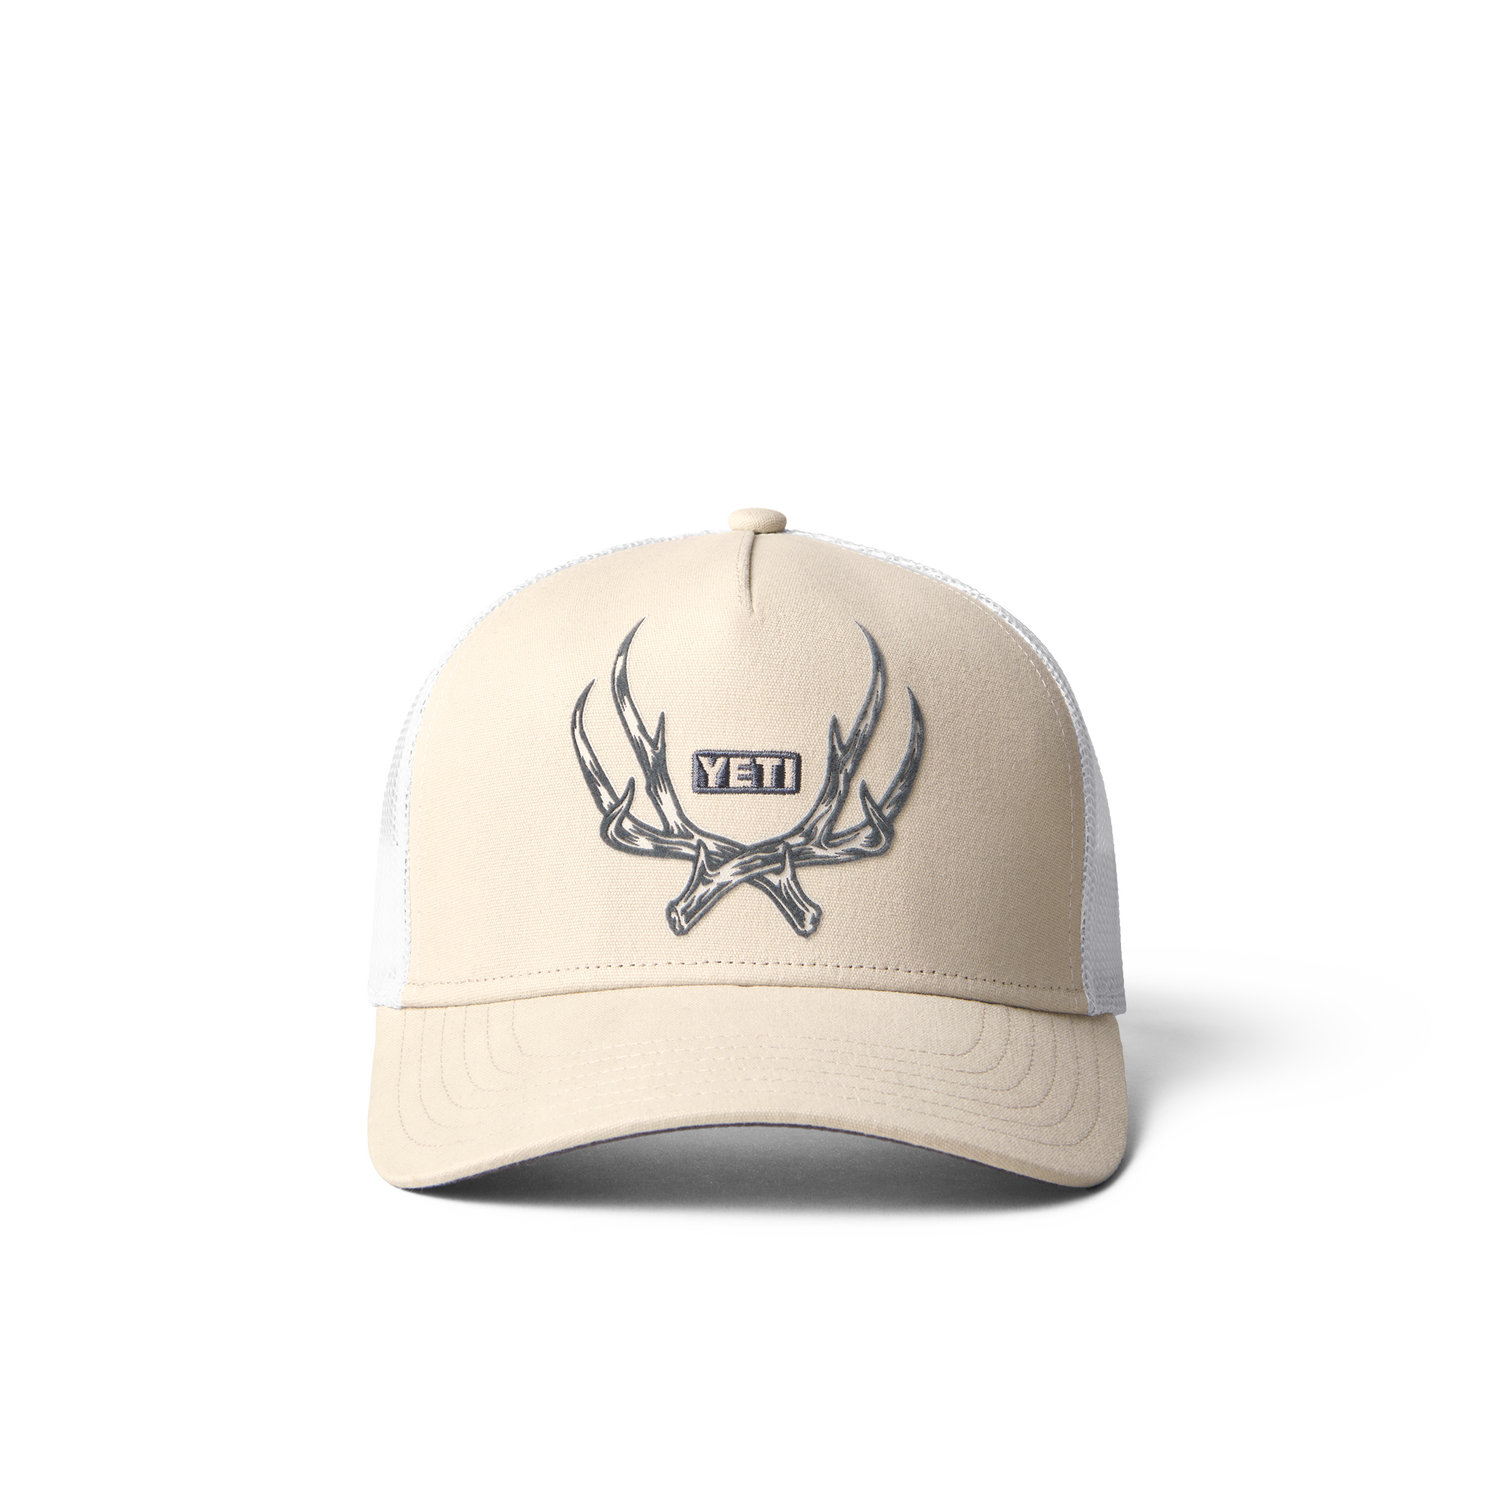 Performance Hunting Trucker Hats, Ball Caps & More